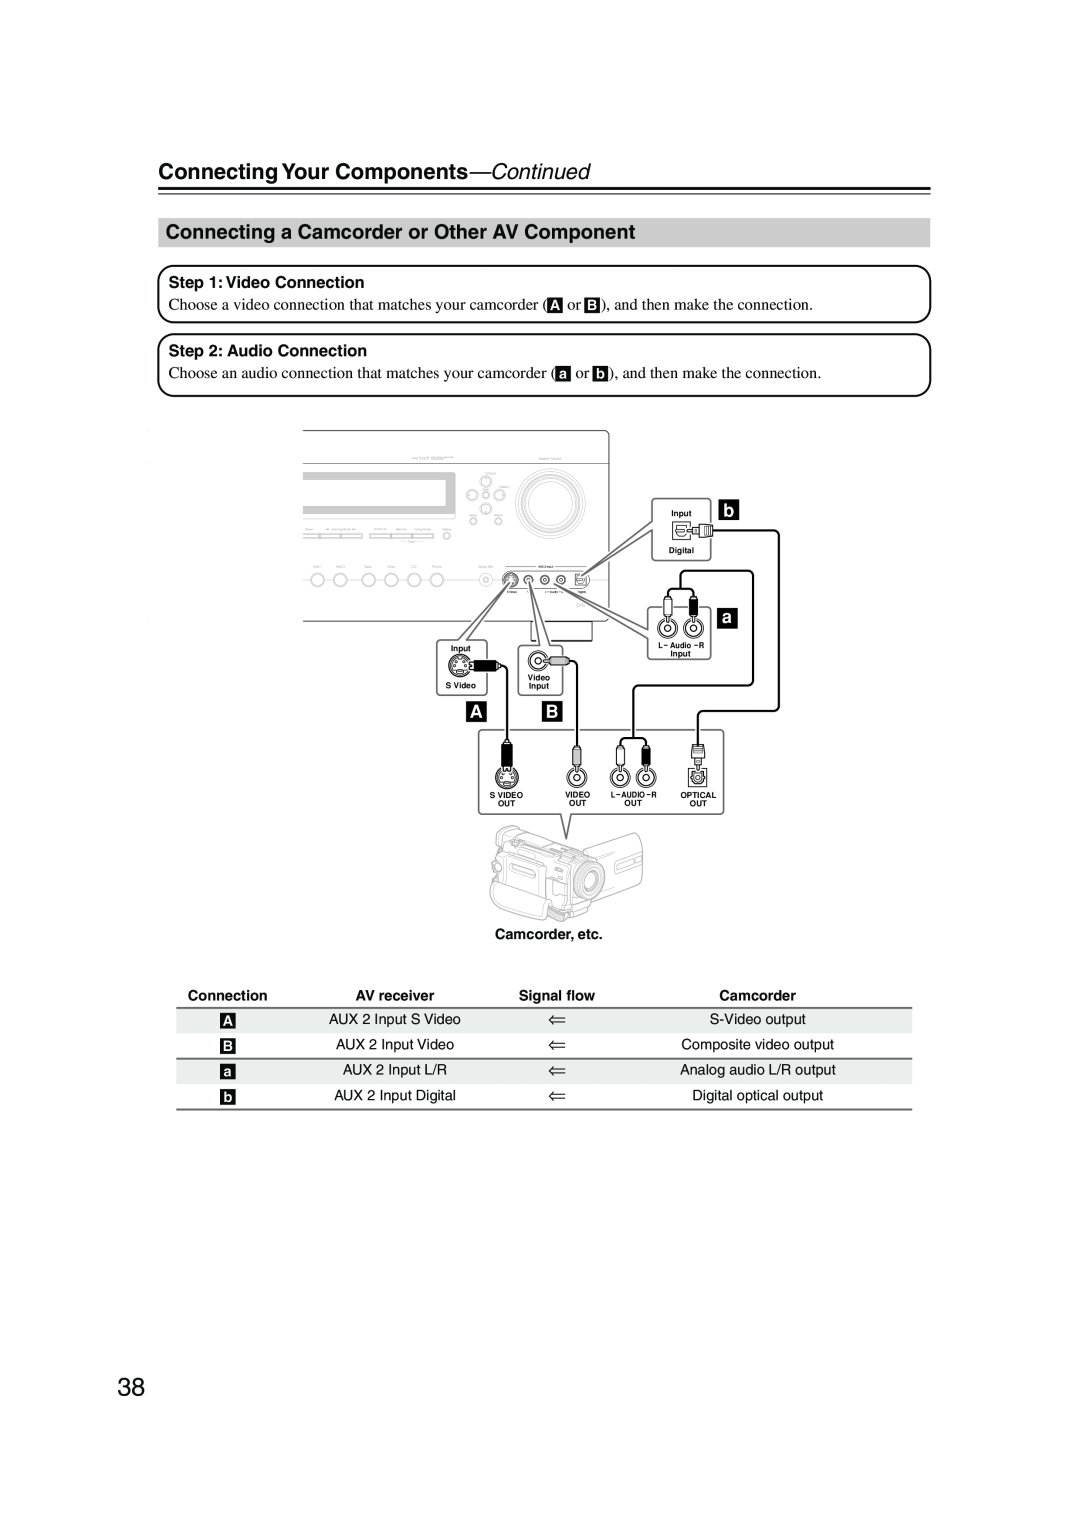 Integra DTR-7.8 instruction manual Connecting a Camcorder or Other AV Component, Connecting Your Components—Continued 